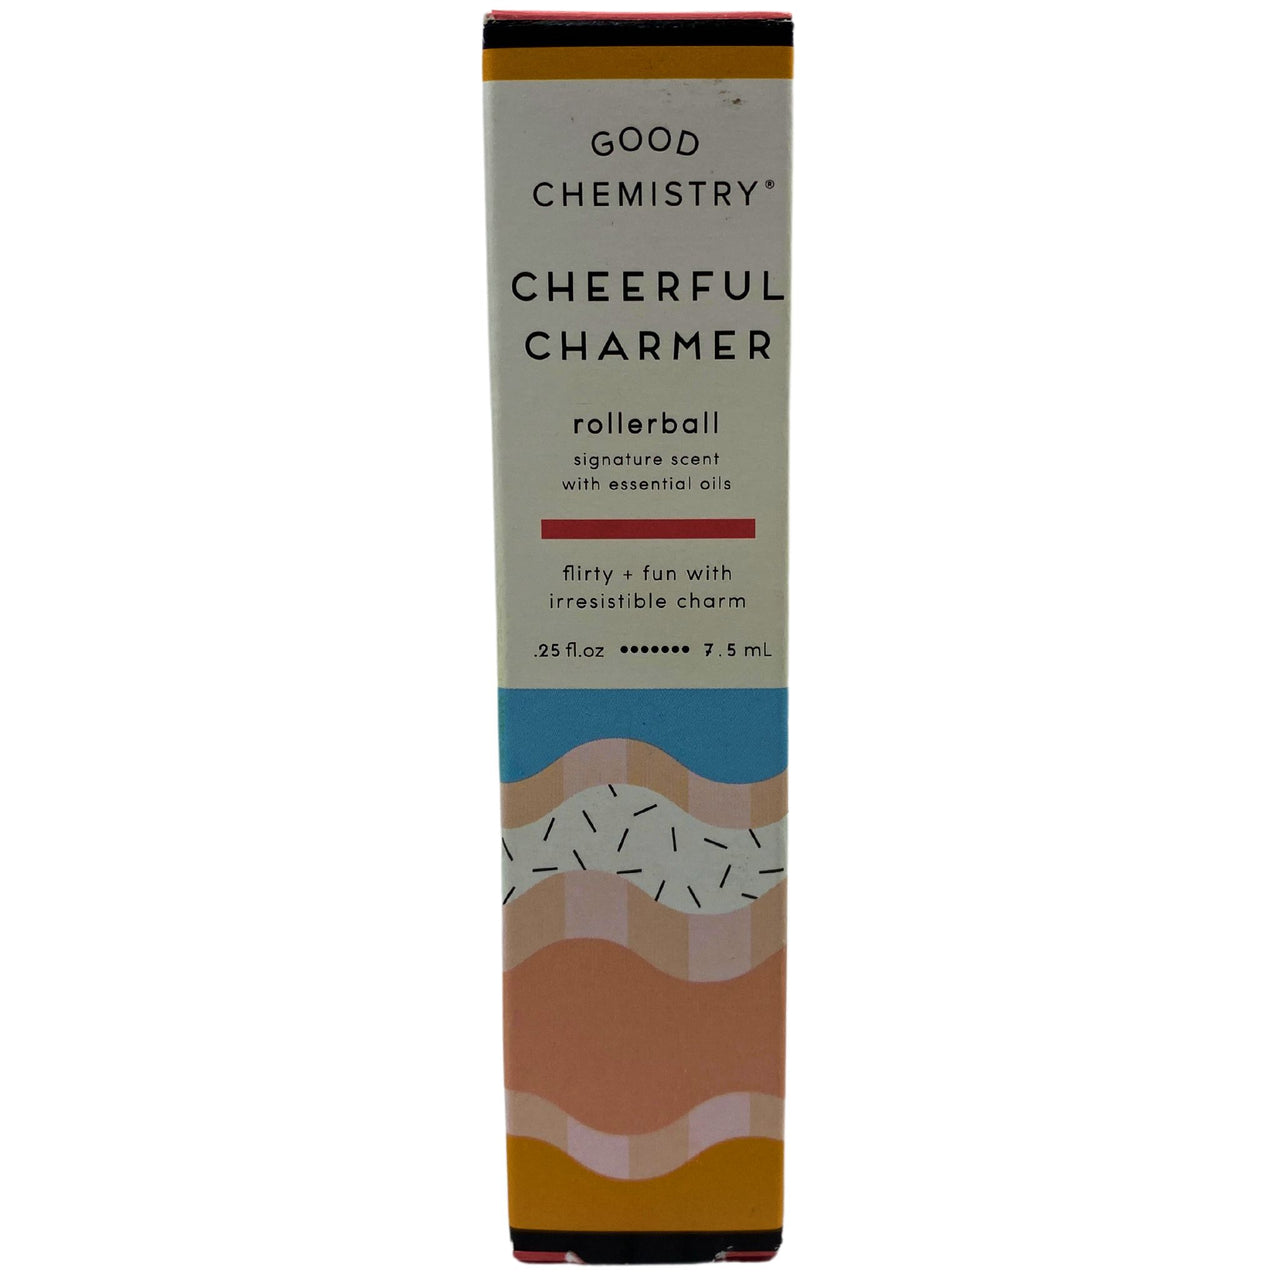 Good Chemistry Cheerful Charmer Rollerball Signature Scent with Essential Oils